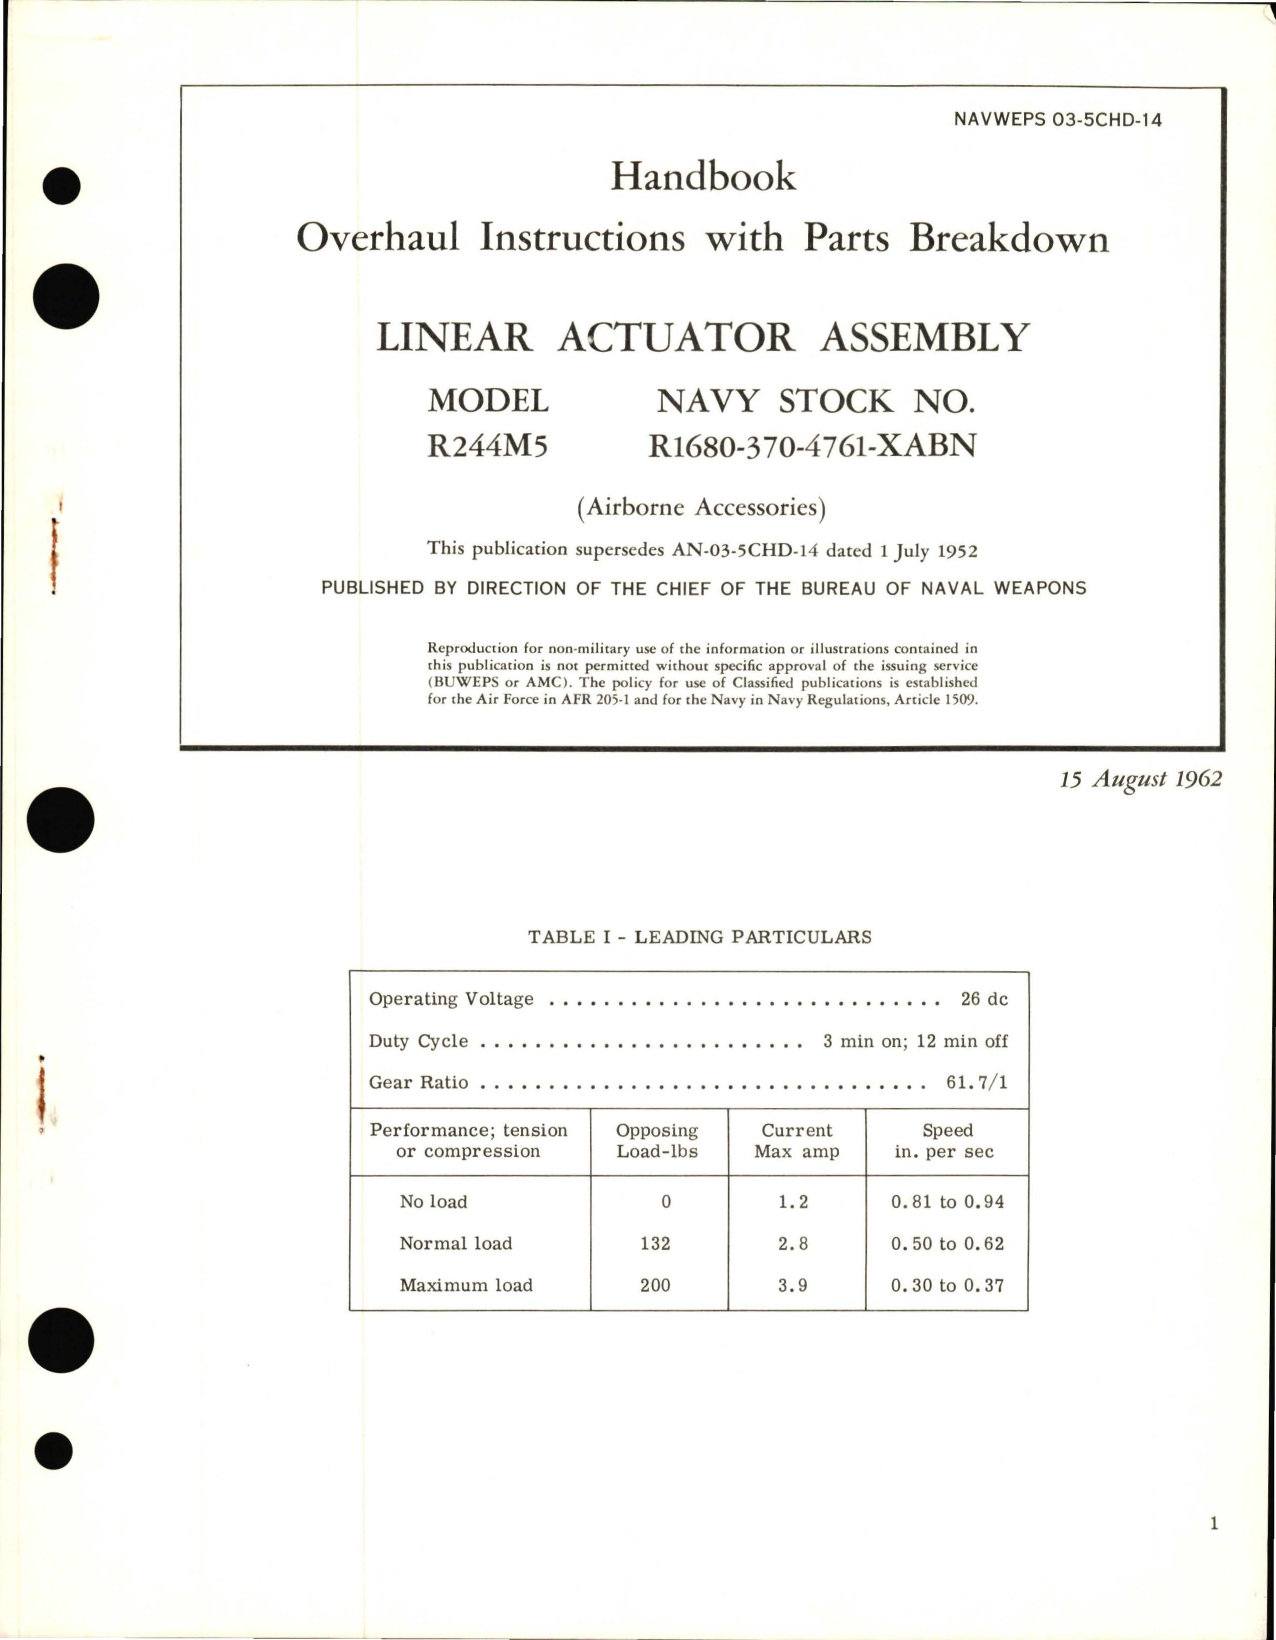 Sample page 1 from AirCorps Library document: Overhaul Instructions with Parts Breakdown for Linear Actuator Assembly Model R244M5 and R1680-370-4761-XABN